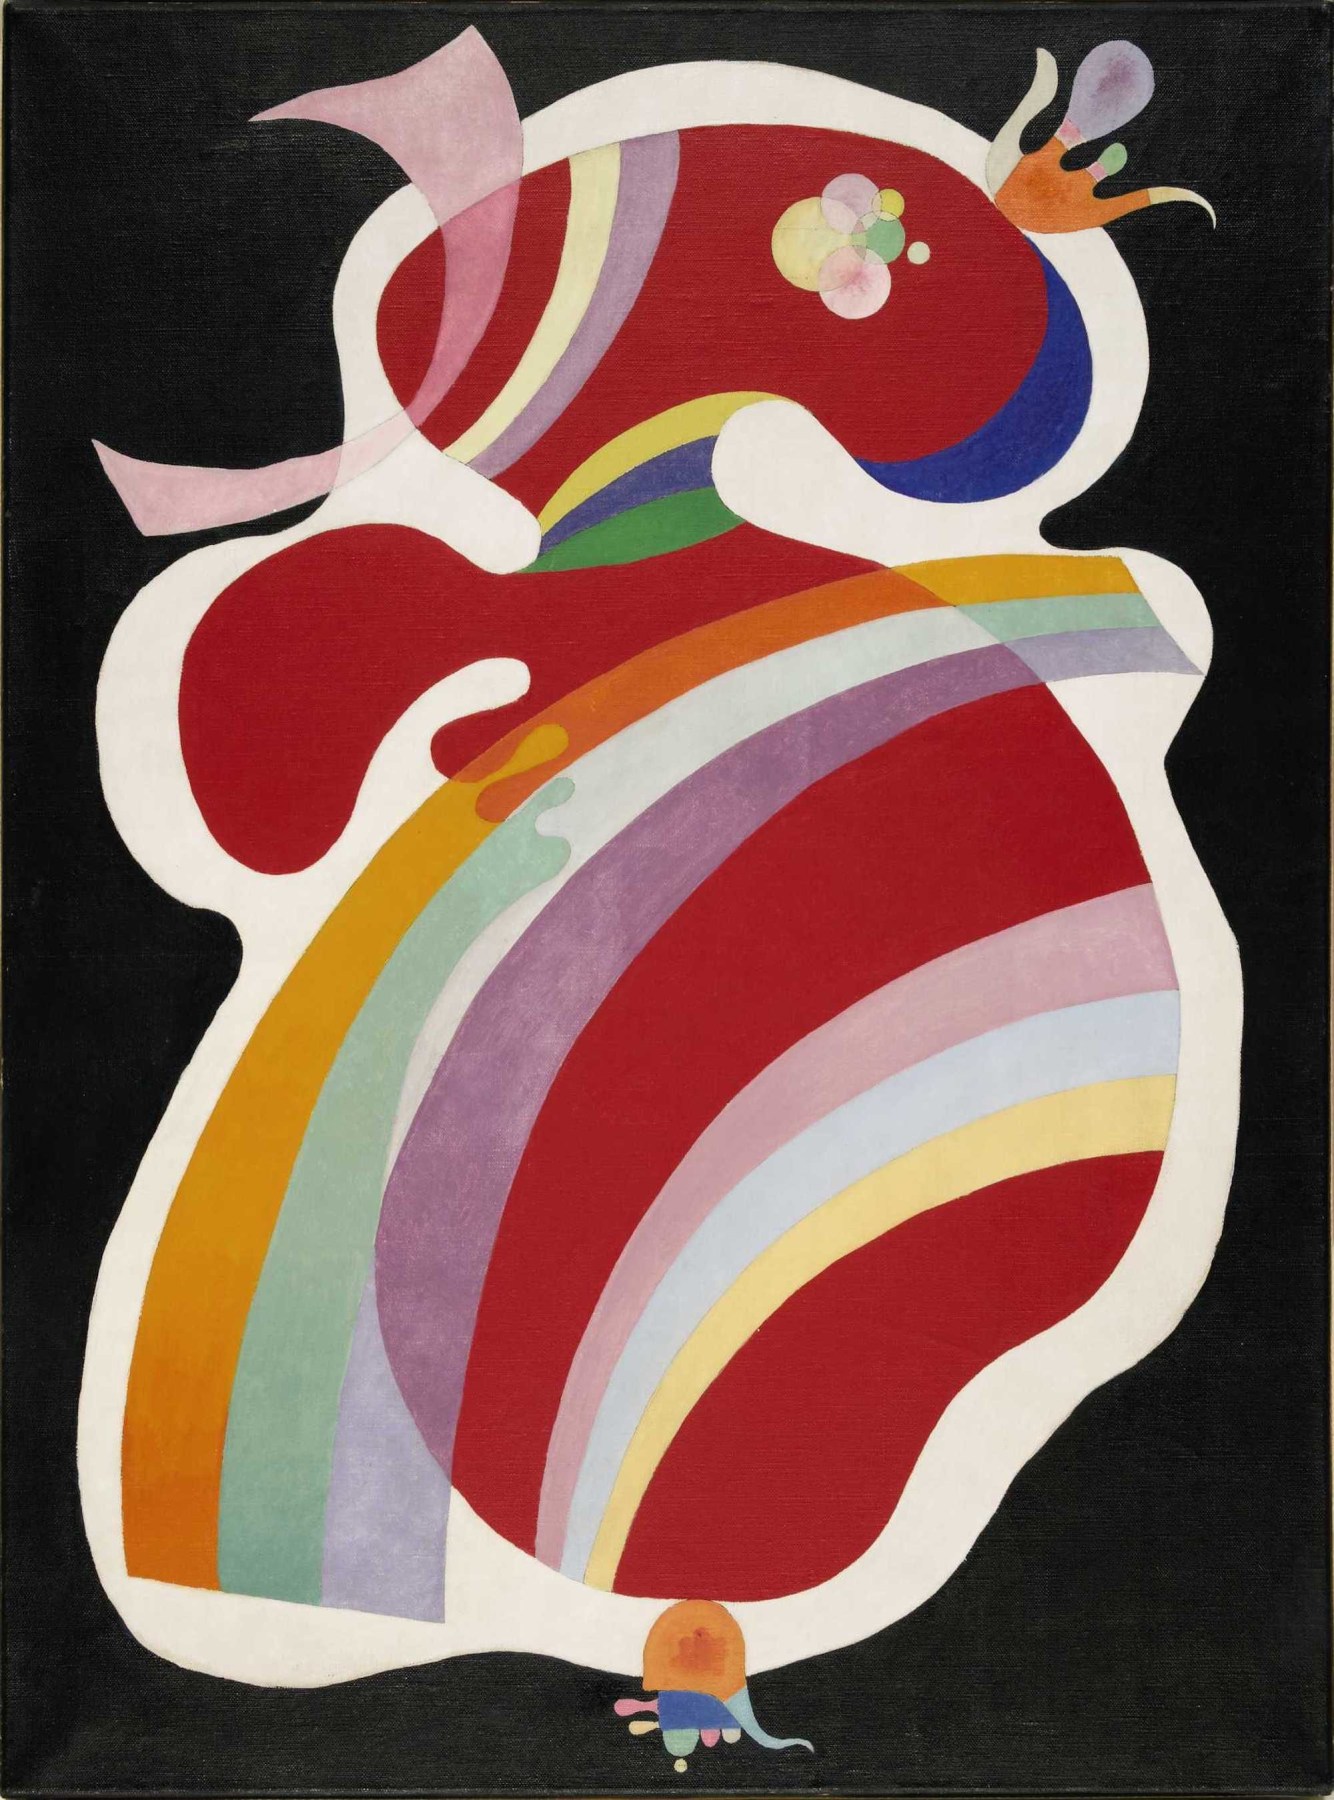 Wassily Kandinsky, La Forme Rouge (Die Rote Form) (Red Form), 1938. Oil on canvas 82 x 60 cm. (32.3 x 23.6 in.) &copy;Helly Nahmad Gallery NY